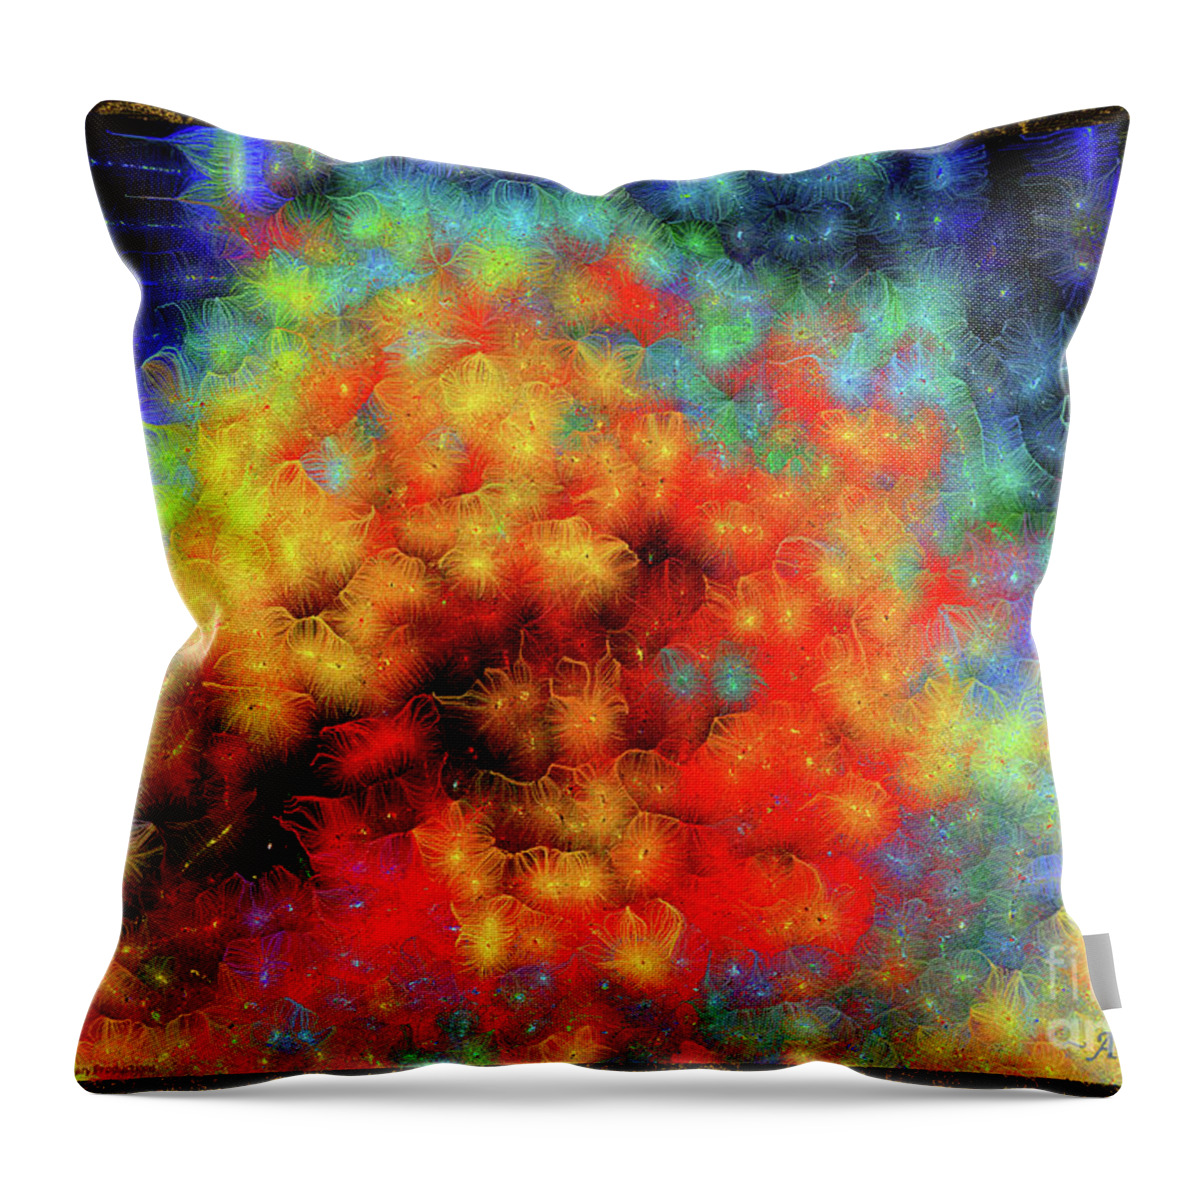 Euphoria Throw Pillow featuring the mixed media Triumphant Rebirth of an Original Mind Number 1 by Aberjhani